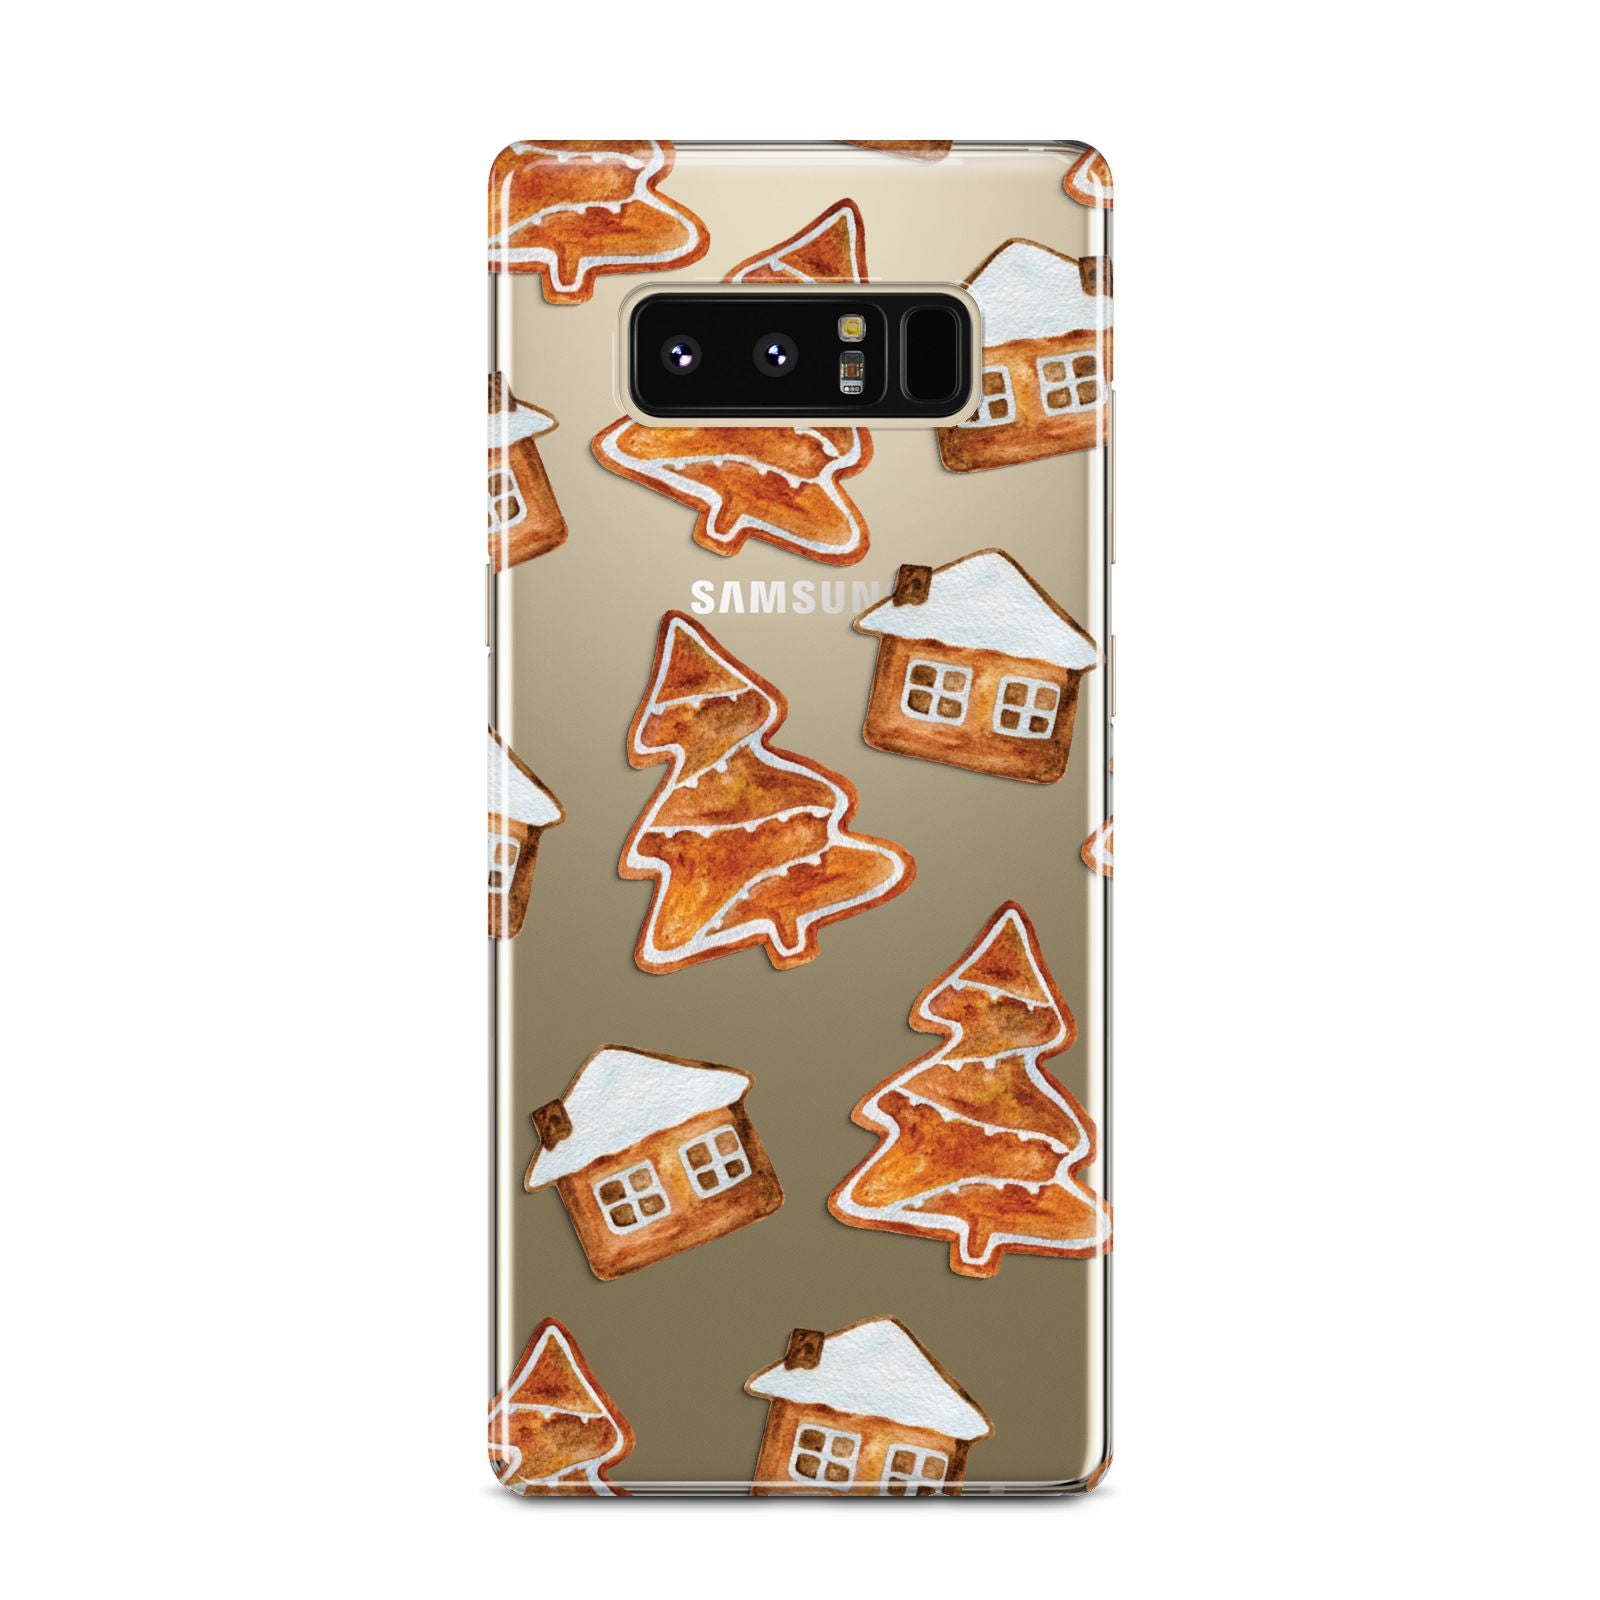 Gingerbread House Tree Samsung Galaxy Note 8 Case